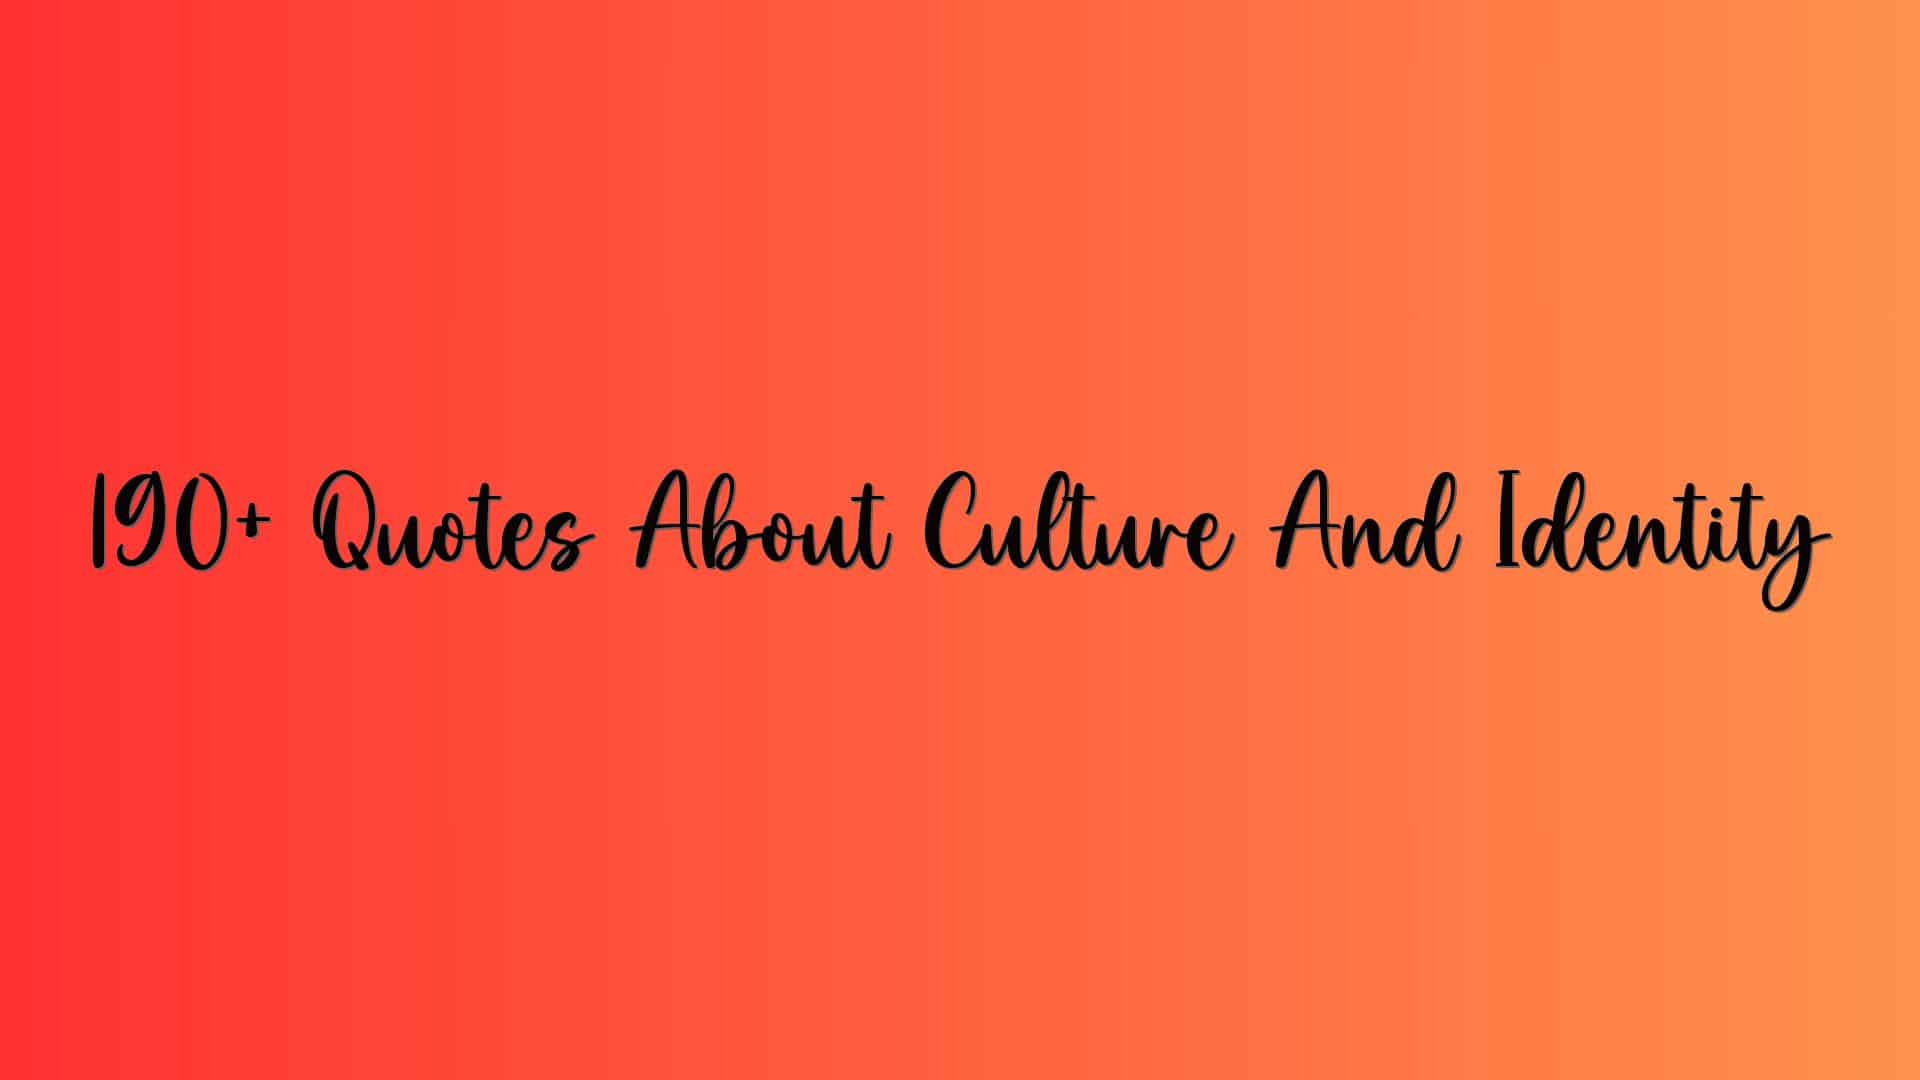 190+ Quotes About Culture And Identity